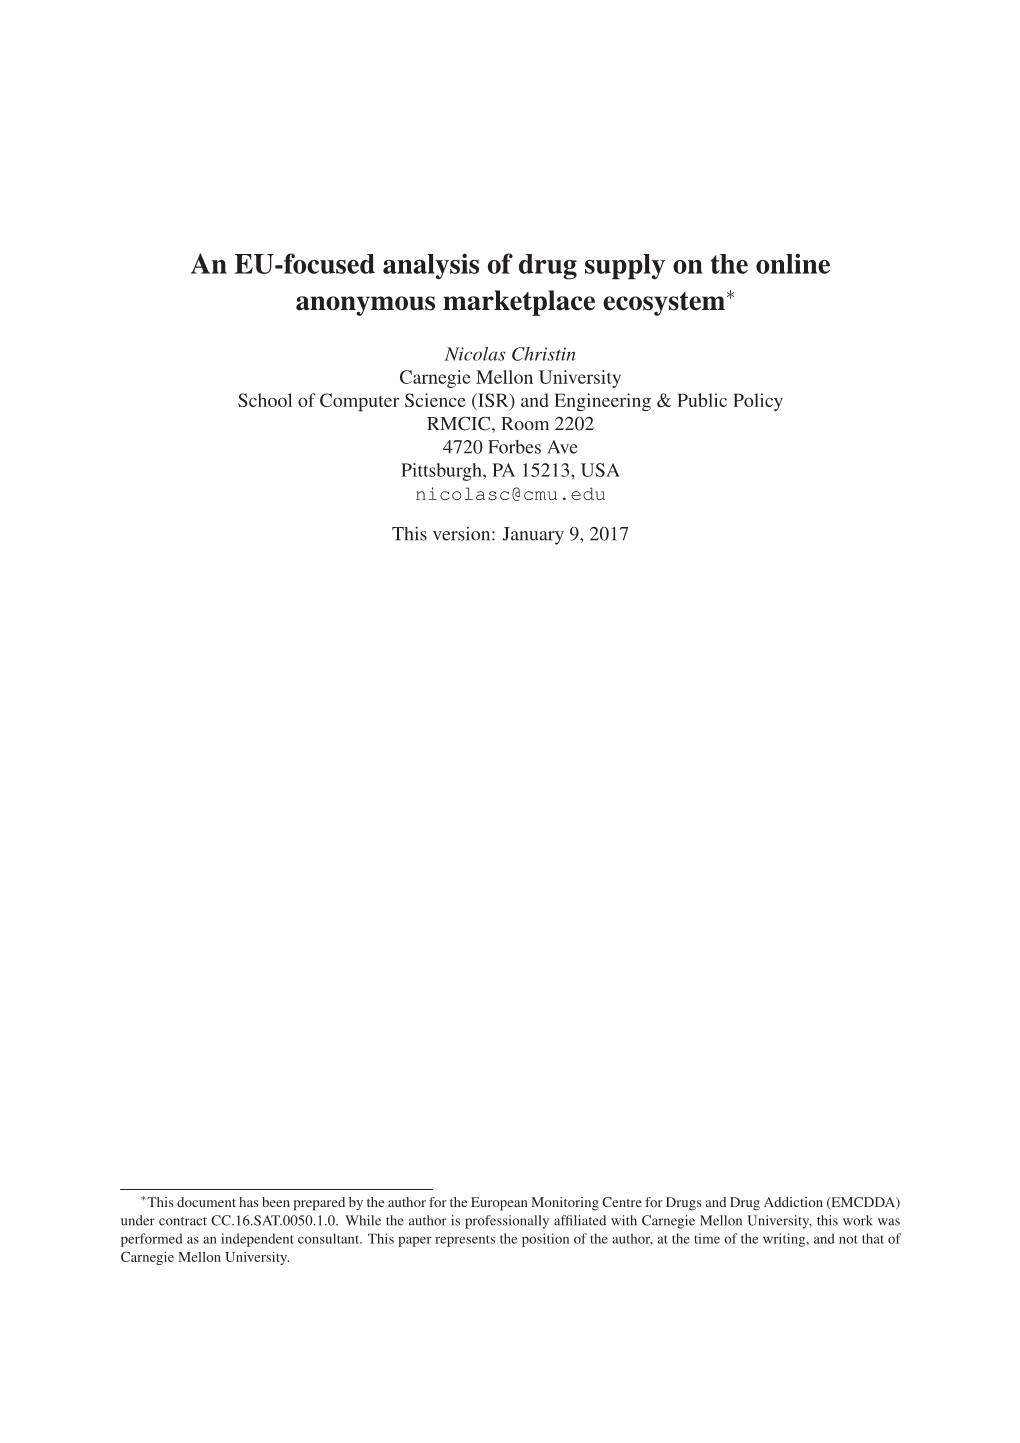 An EU-Focused Analysis of Drug Supply on the Online Anonymous Marketplace Ecosystem ∗